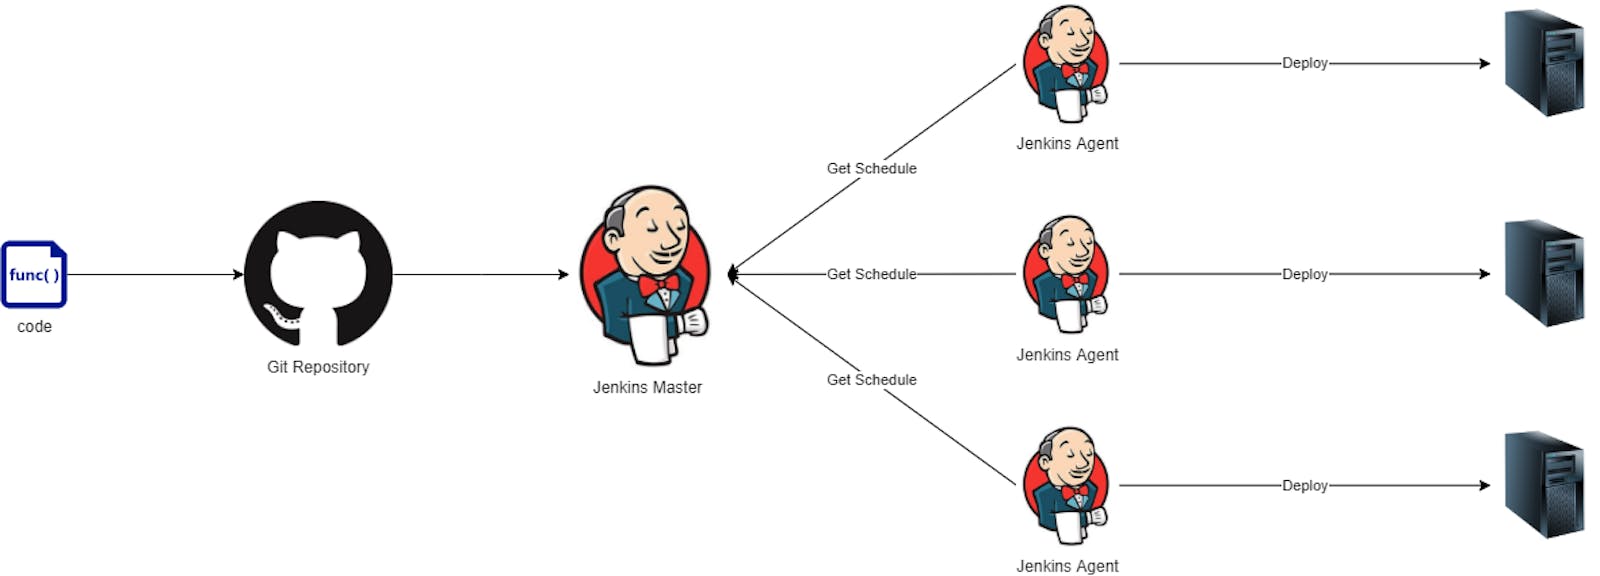 Guide to Understanding Jenkins🧛‍♂️Master-Slave 👷‍♂️👷‍♀️ Architecture 🚀